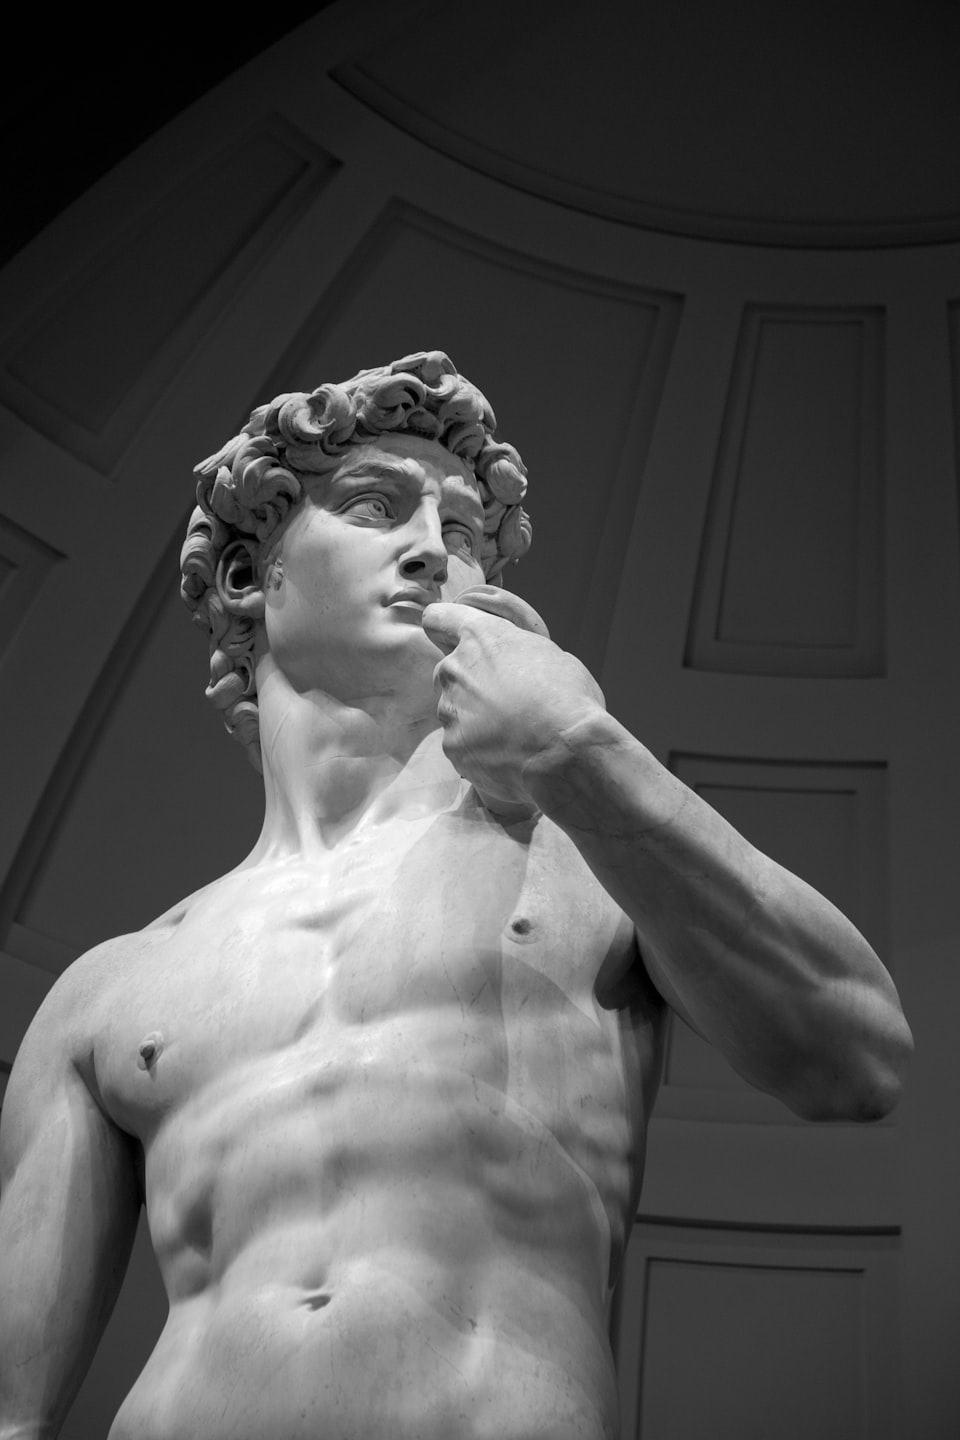 To Desire and Deserve to sculpt David